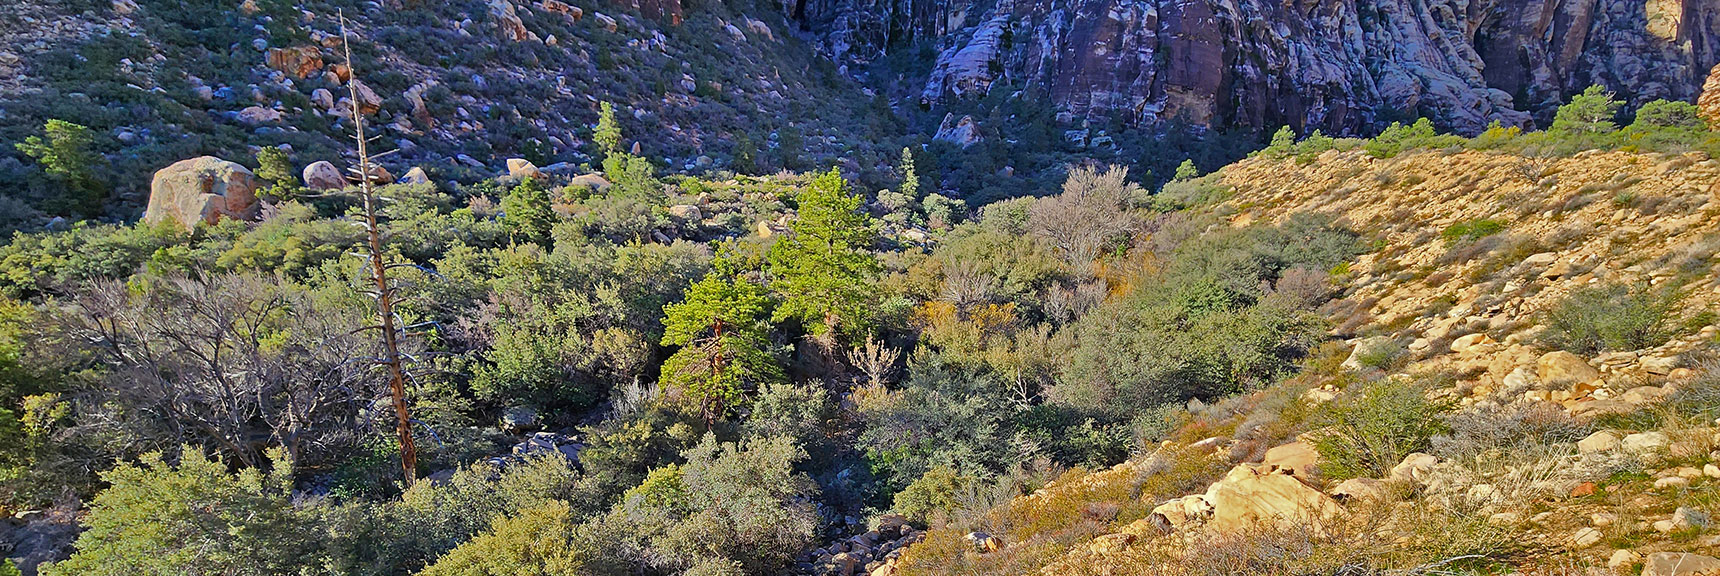 Lower Canyon Base and Creek to Your Left. Thicker Forest Below | Ice Box Canyon | Red Rock Canyon NCA, Nevada | Las Vegas Area Trails | David Smith